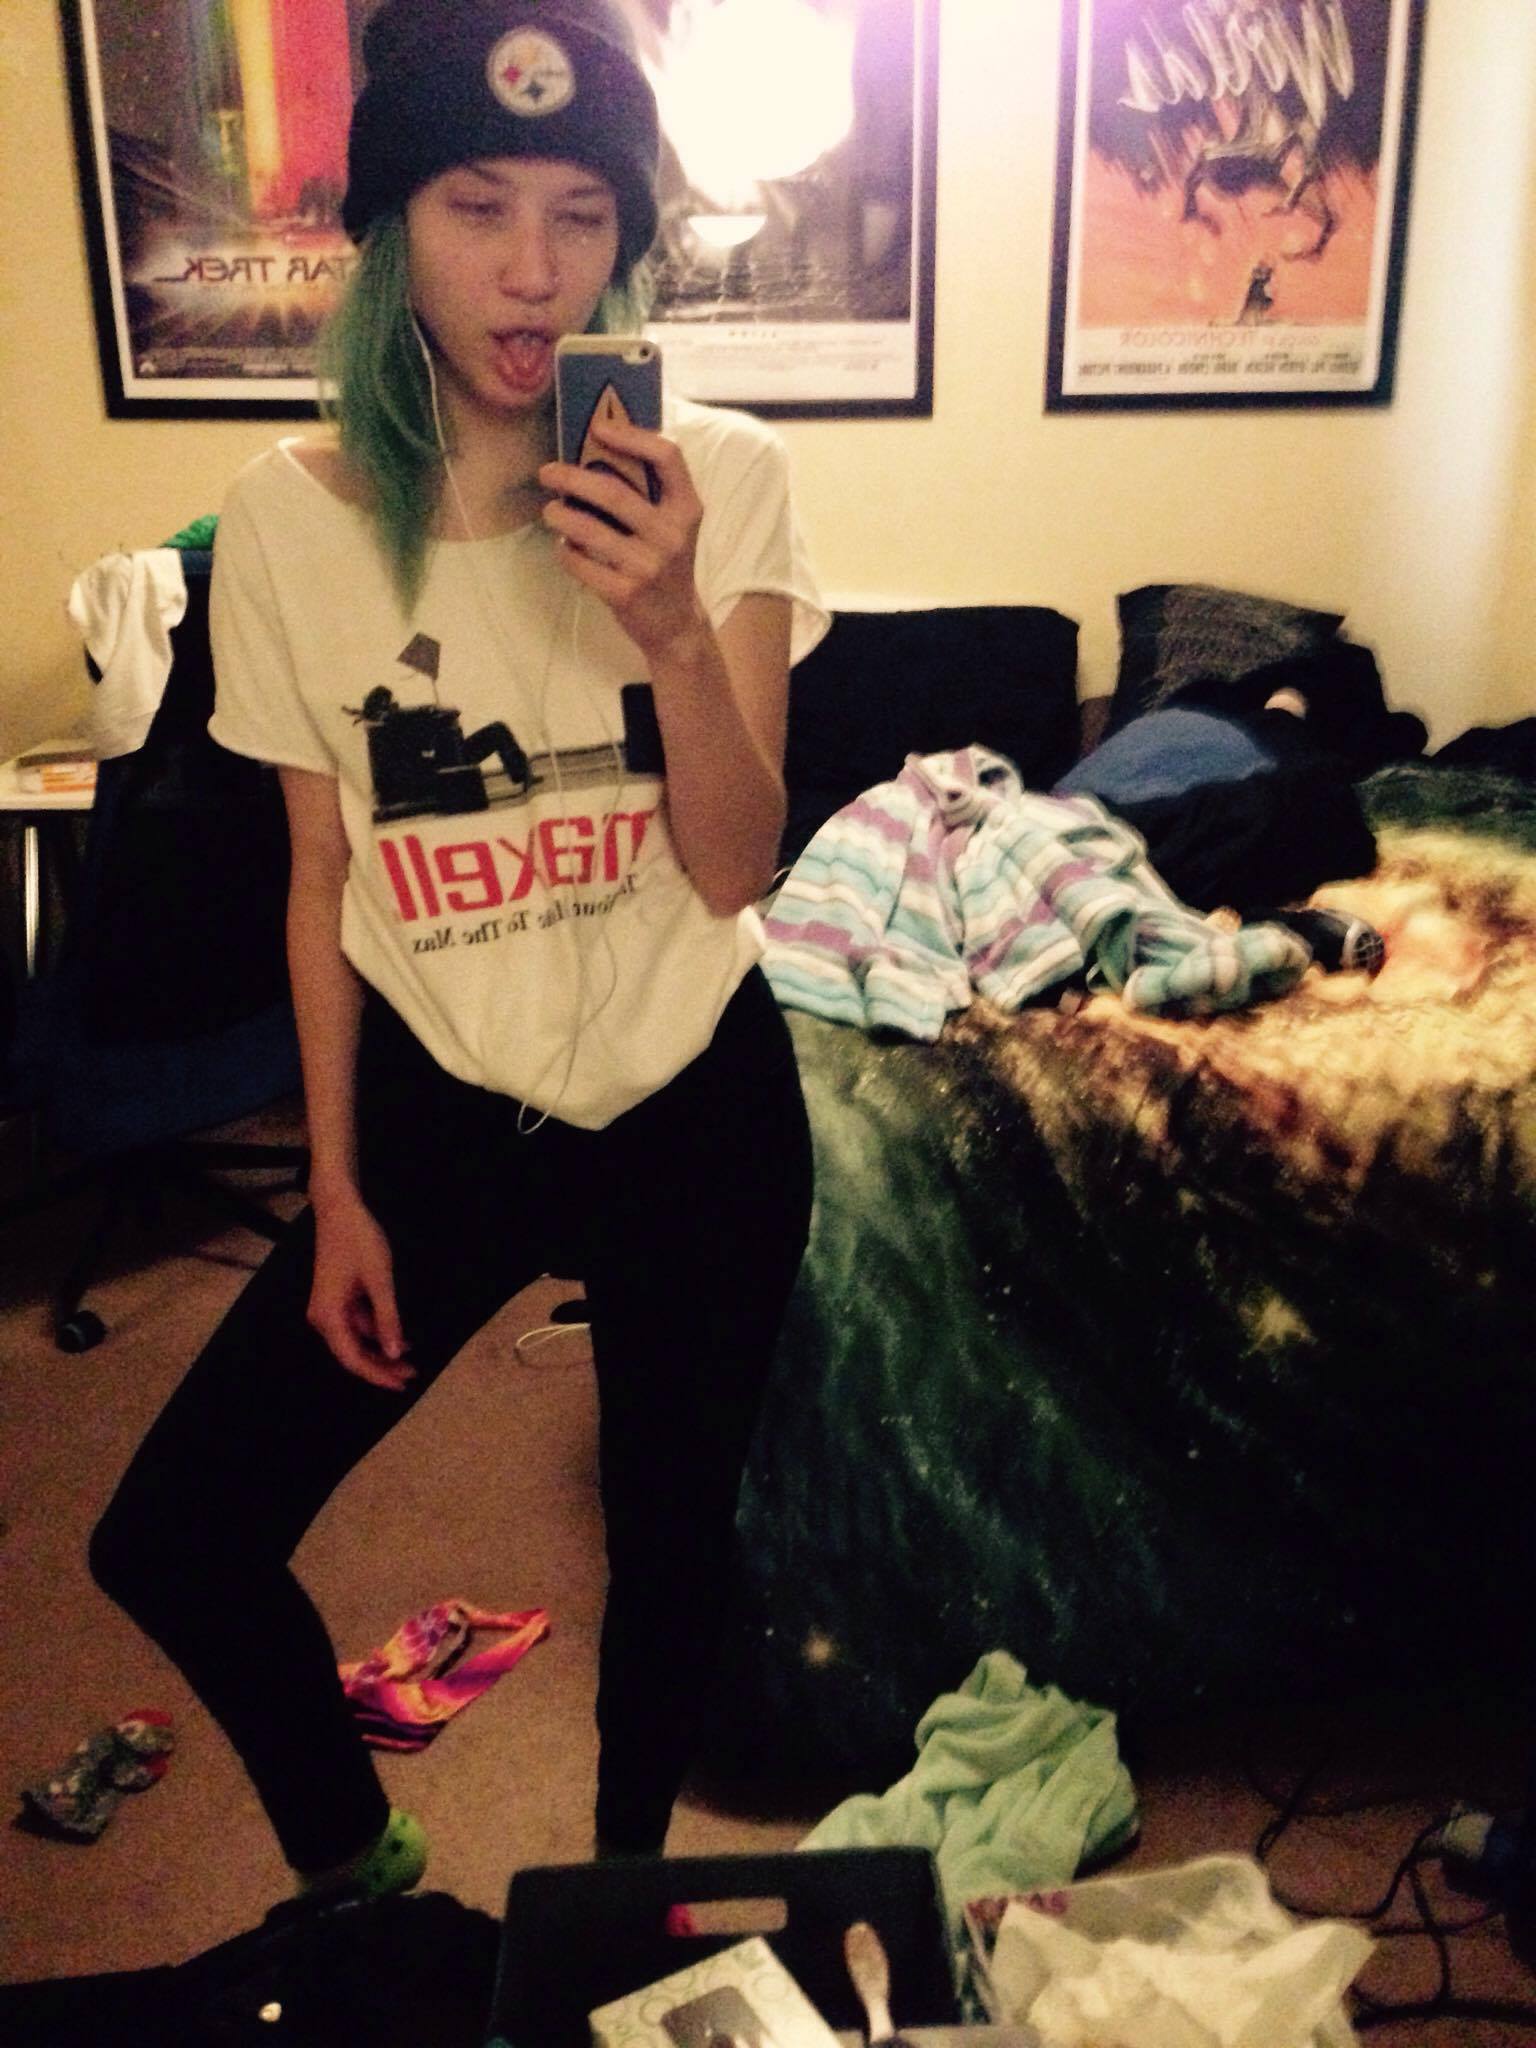 A photo of me with green hair in a very messy room